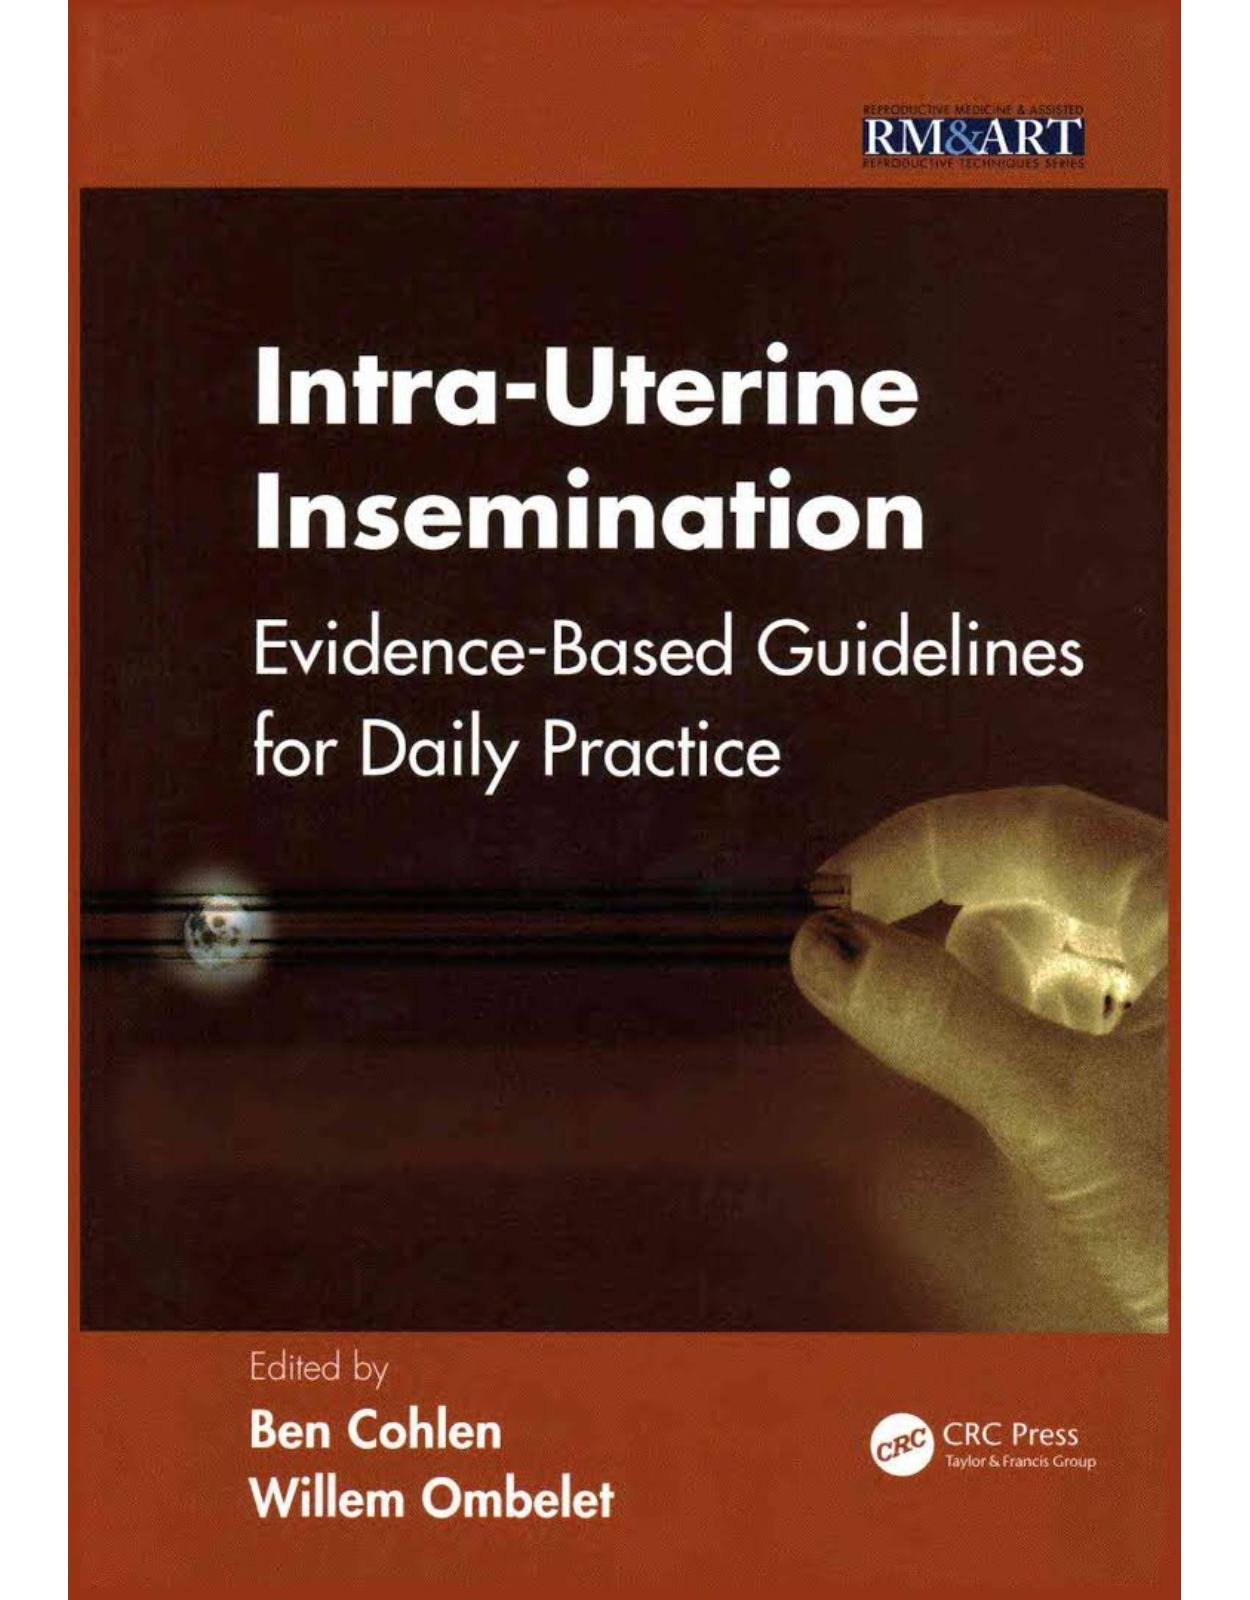 Intra-Uterine Insemination: Evidence Based Guidelines for Daily Practice (Reproductive Medicine and Assisted Reproductive Techniques)